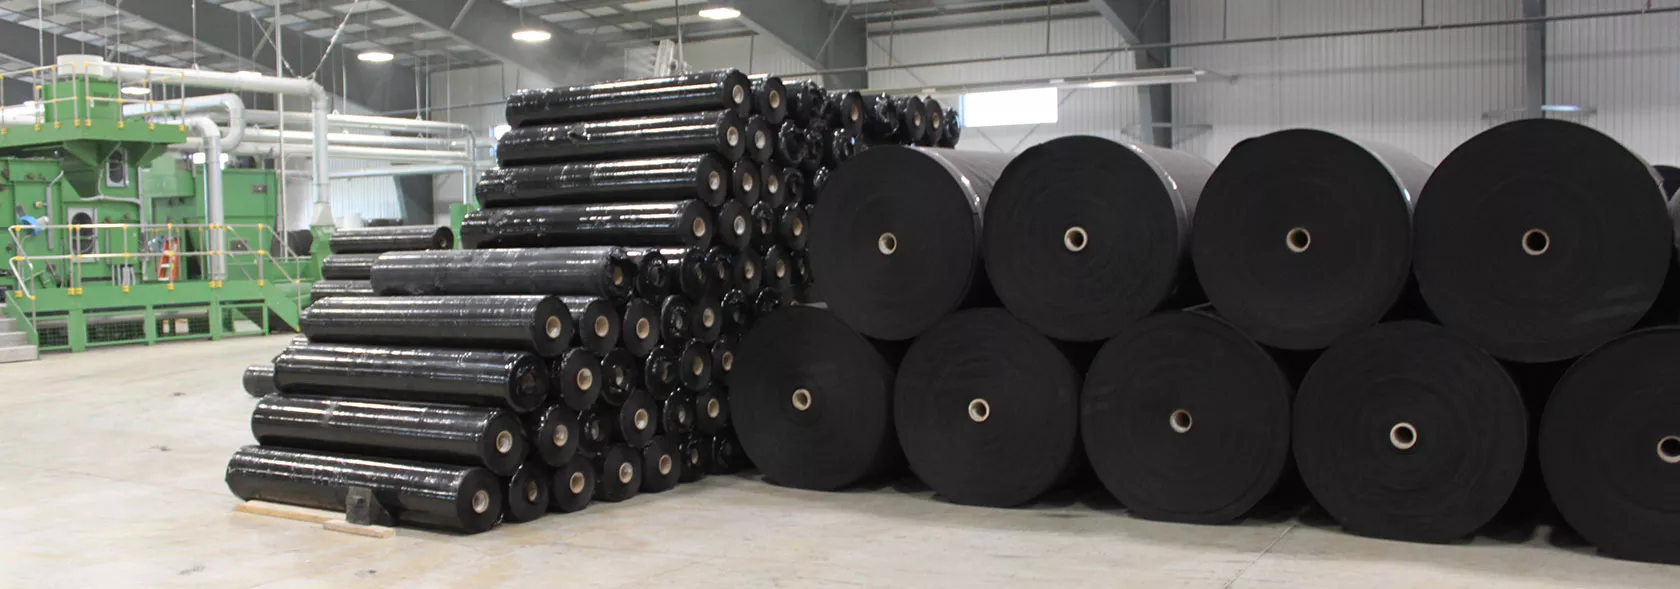 Geotextile Suppliers: Leading the Charge Towards Sustainability